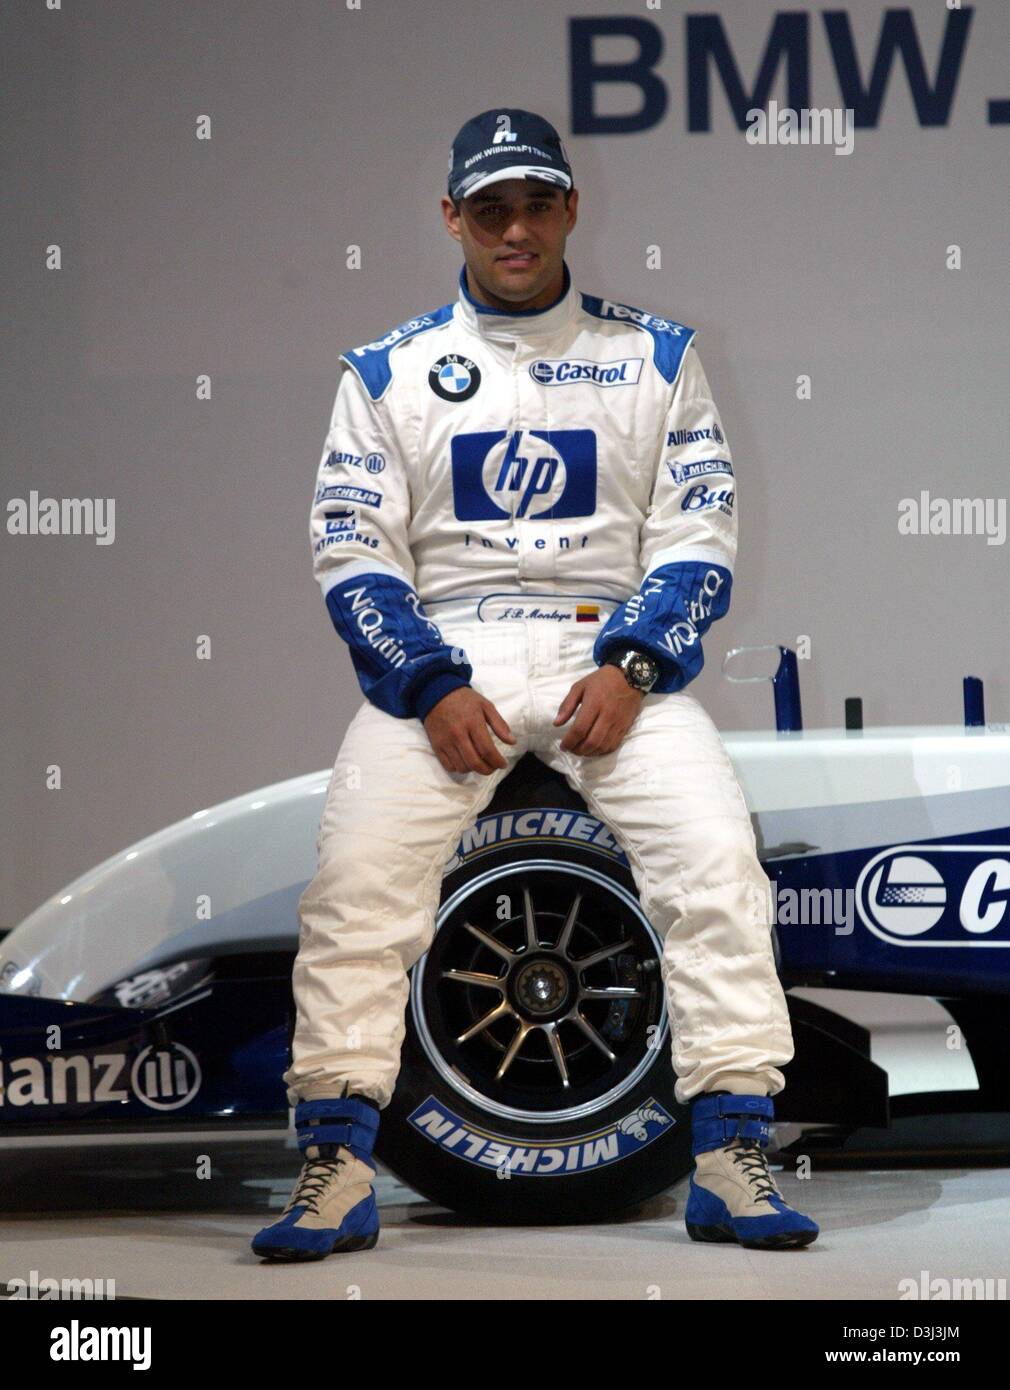 dpa) - Colombian formula one pilot Juan Pablo Montoya sits on the new  BMW-Williams FW26 racing car for the upcoming season during its  presentation in Valencia, Spain, 5 January 2004. The car